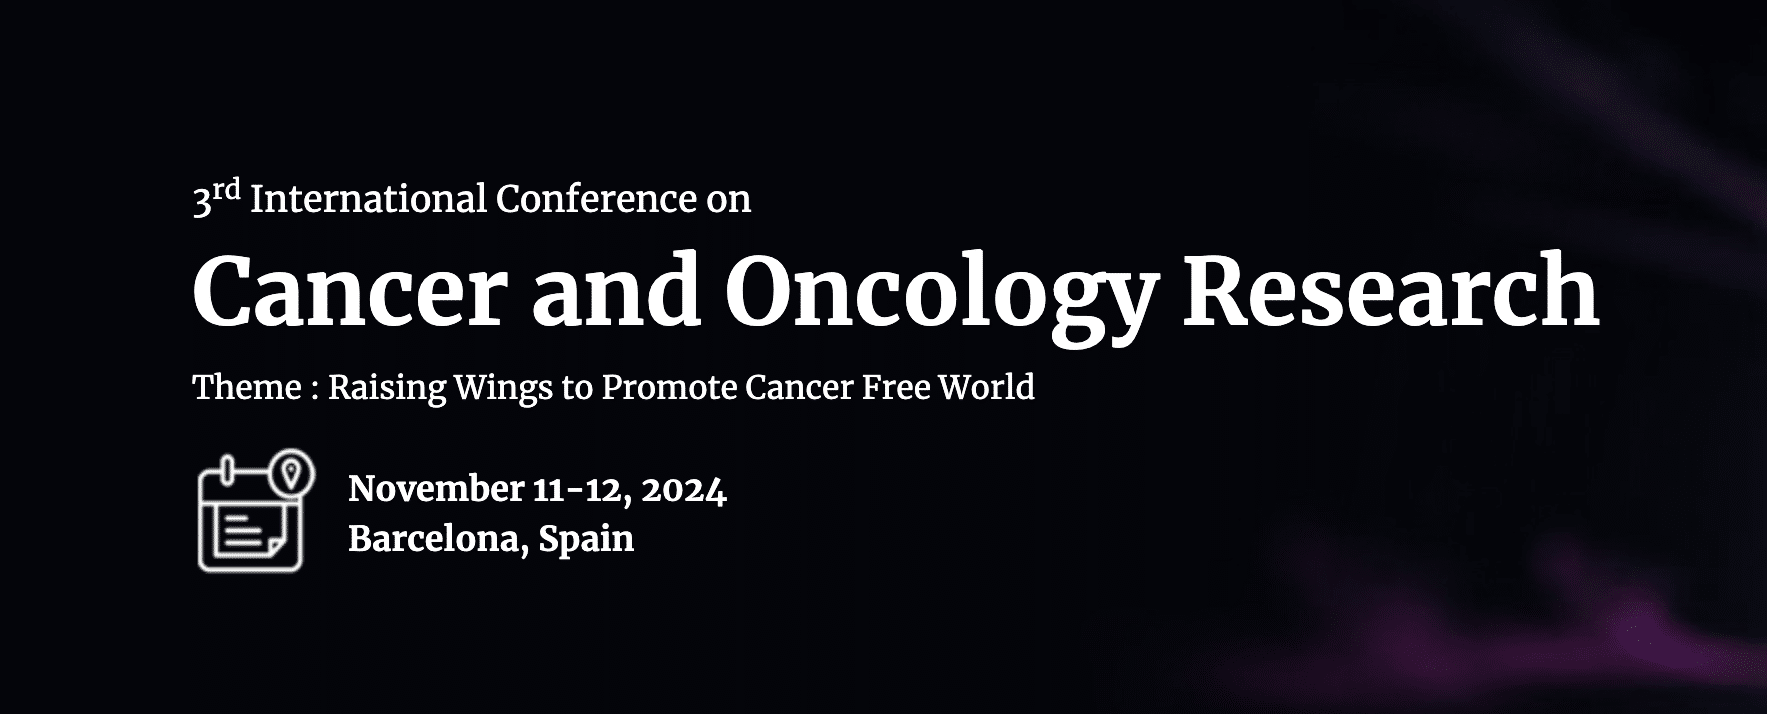 3rd International Conference on Cancer and Oncology Research